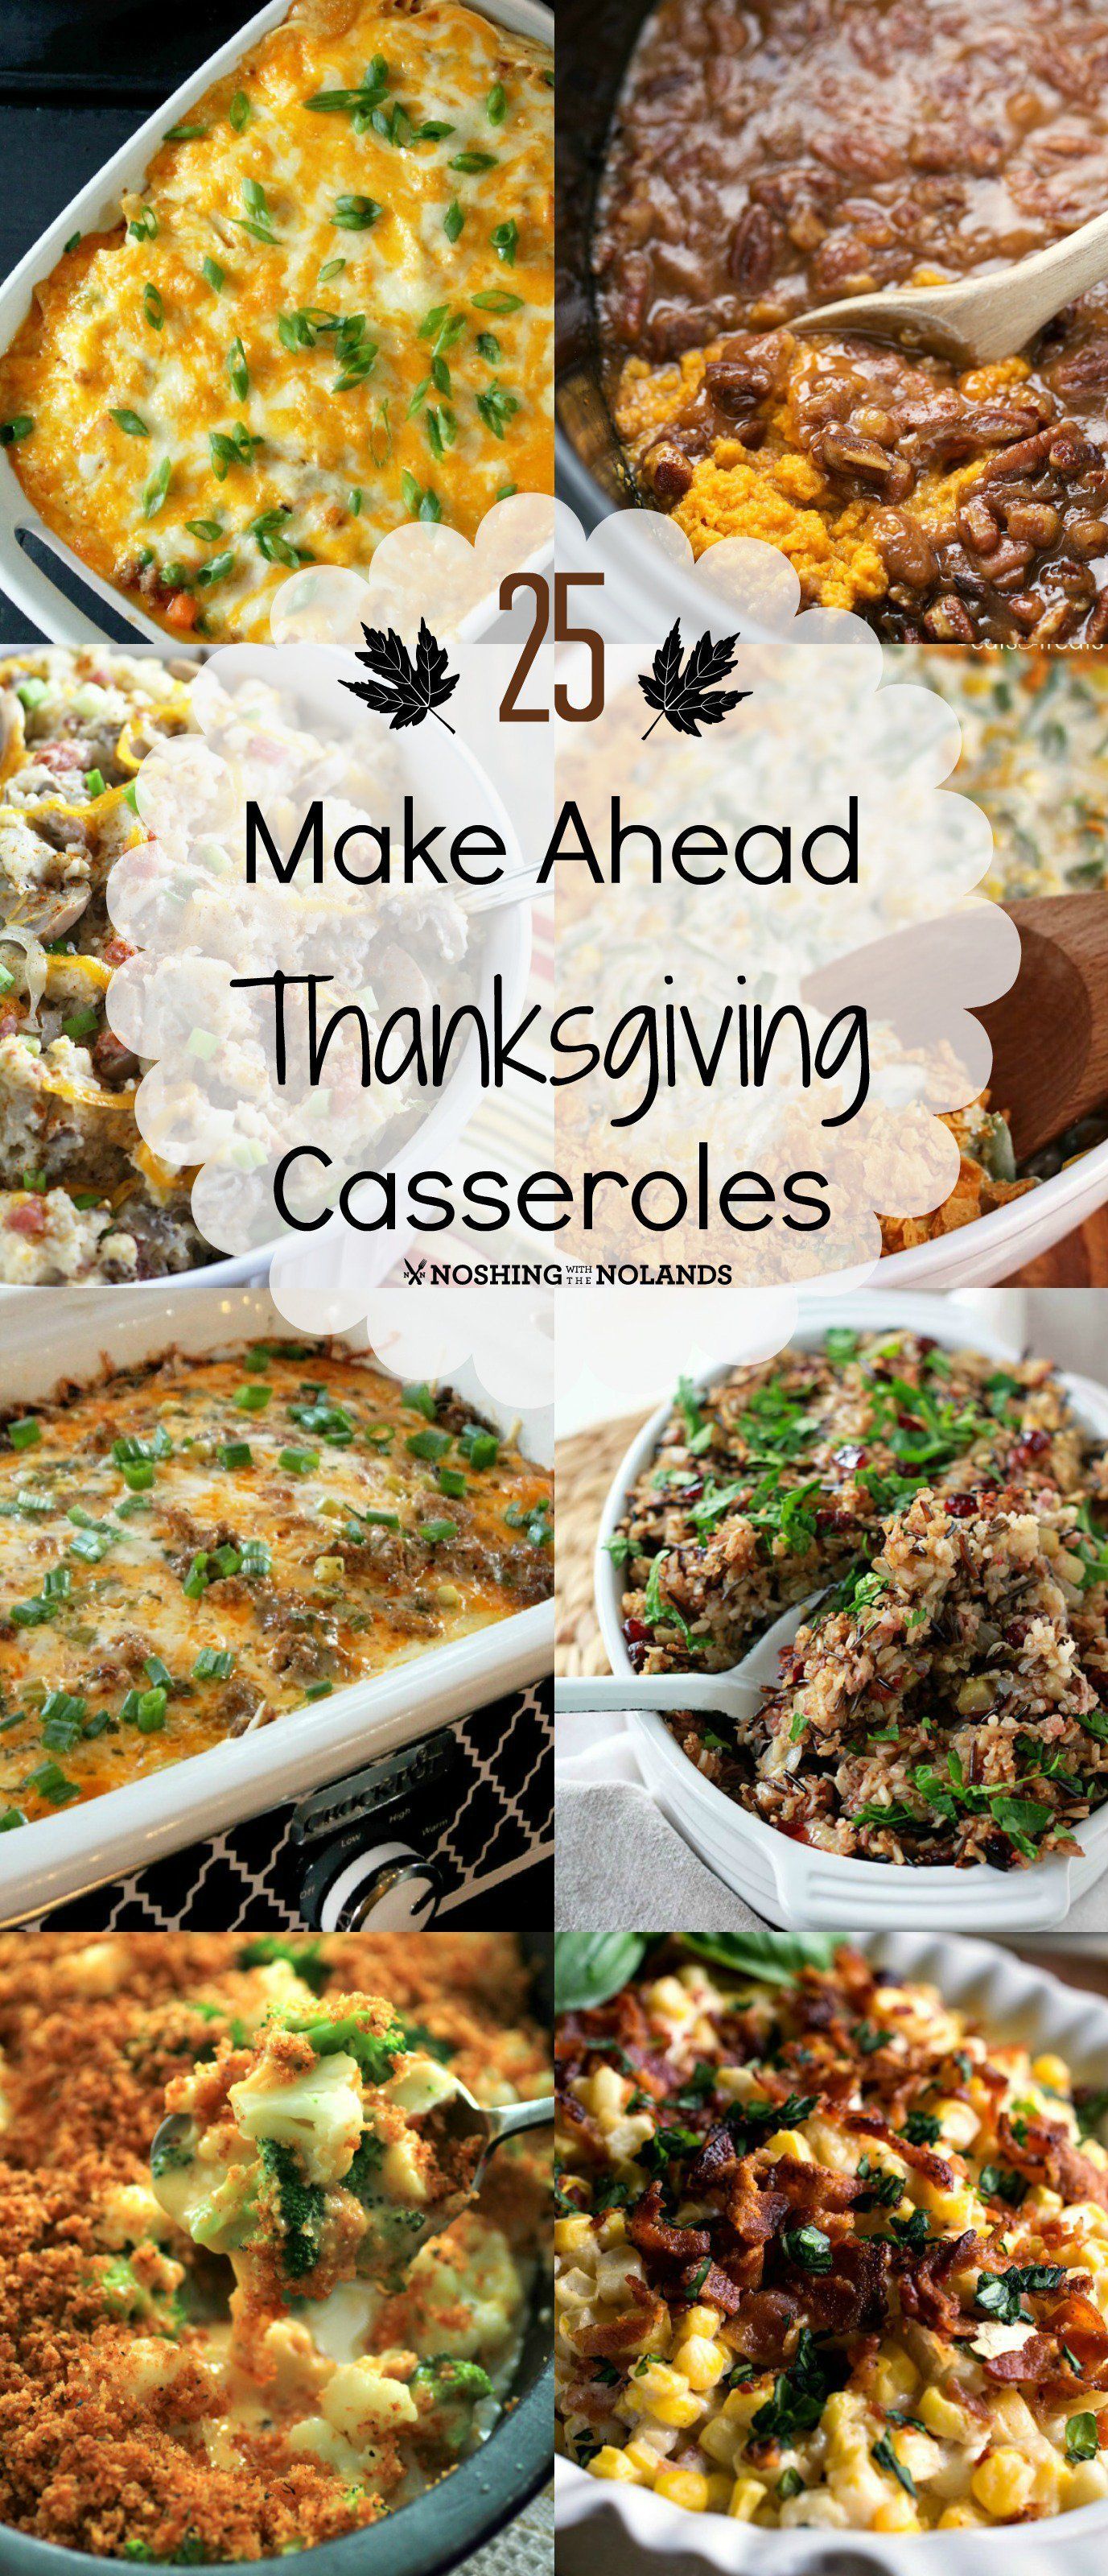 25 Make Ahead Thanksgiving Casseroles by Noshing With The Nolands – Save time by preparing some of these tasty dishes just before